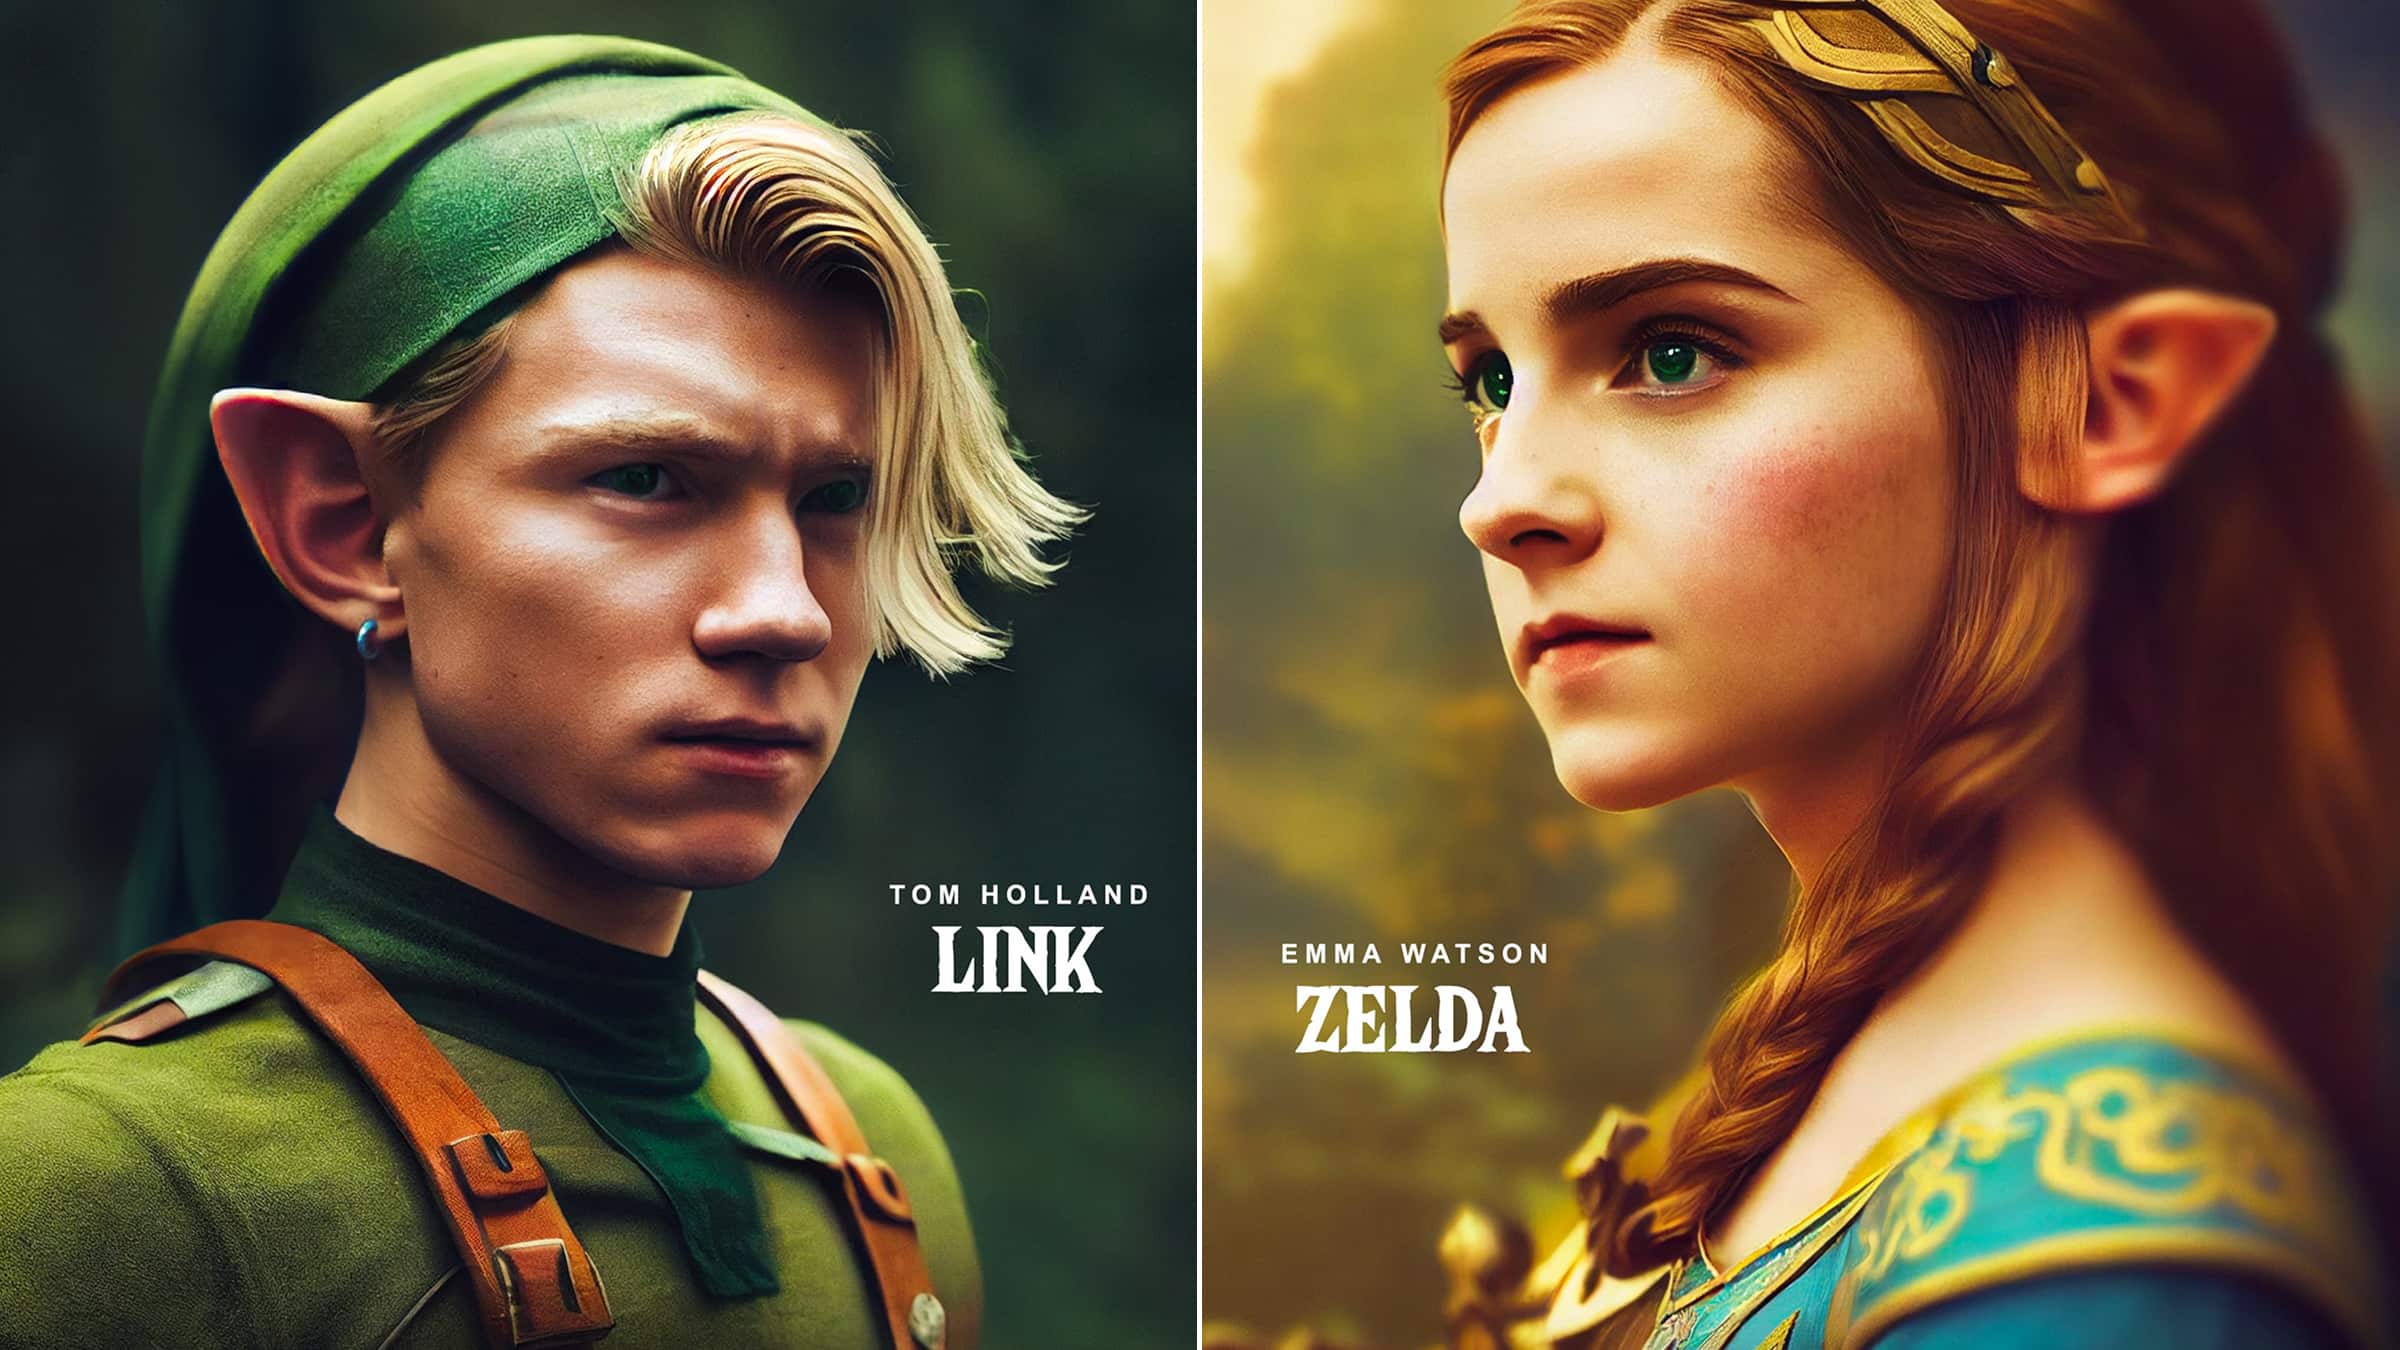 Dan Leveille on Instagram: The full cast of Netflix's live-action Legend  of Zelda series just dropped, revealing an all-star cast starring Tom  Holland, Emma Watson, and Idris Elba! It looks like the